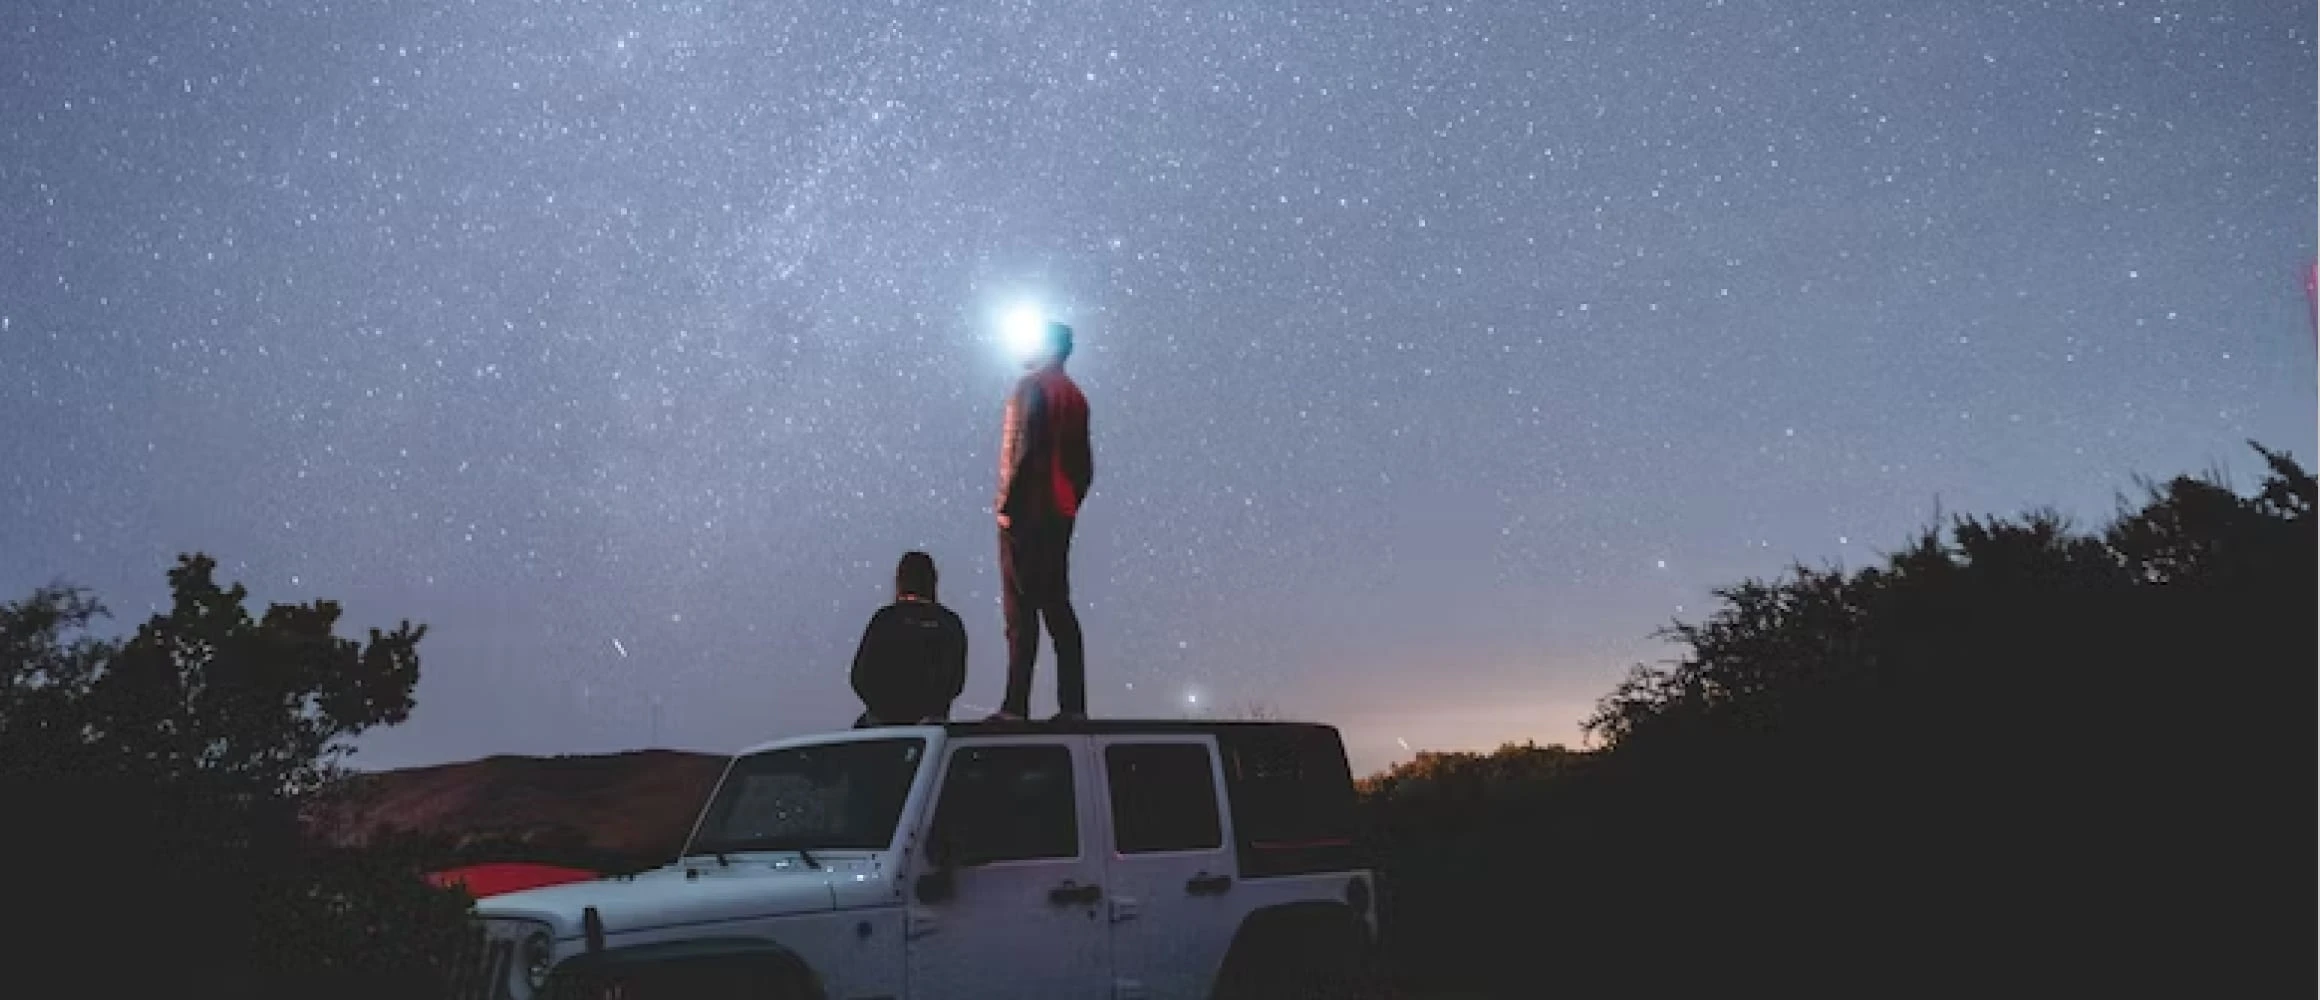 A stargazing experience